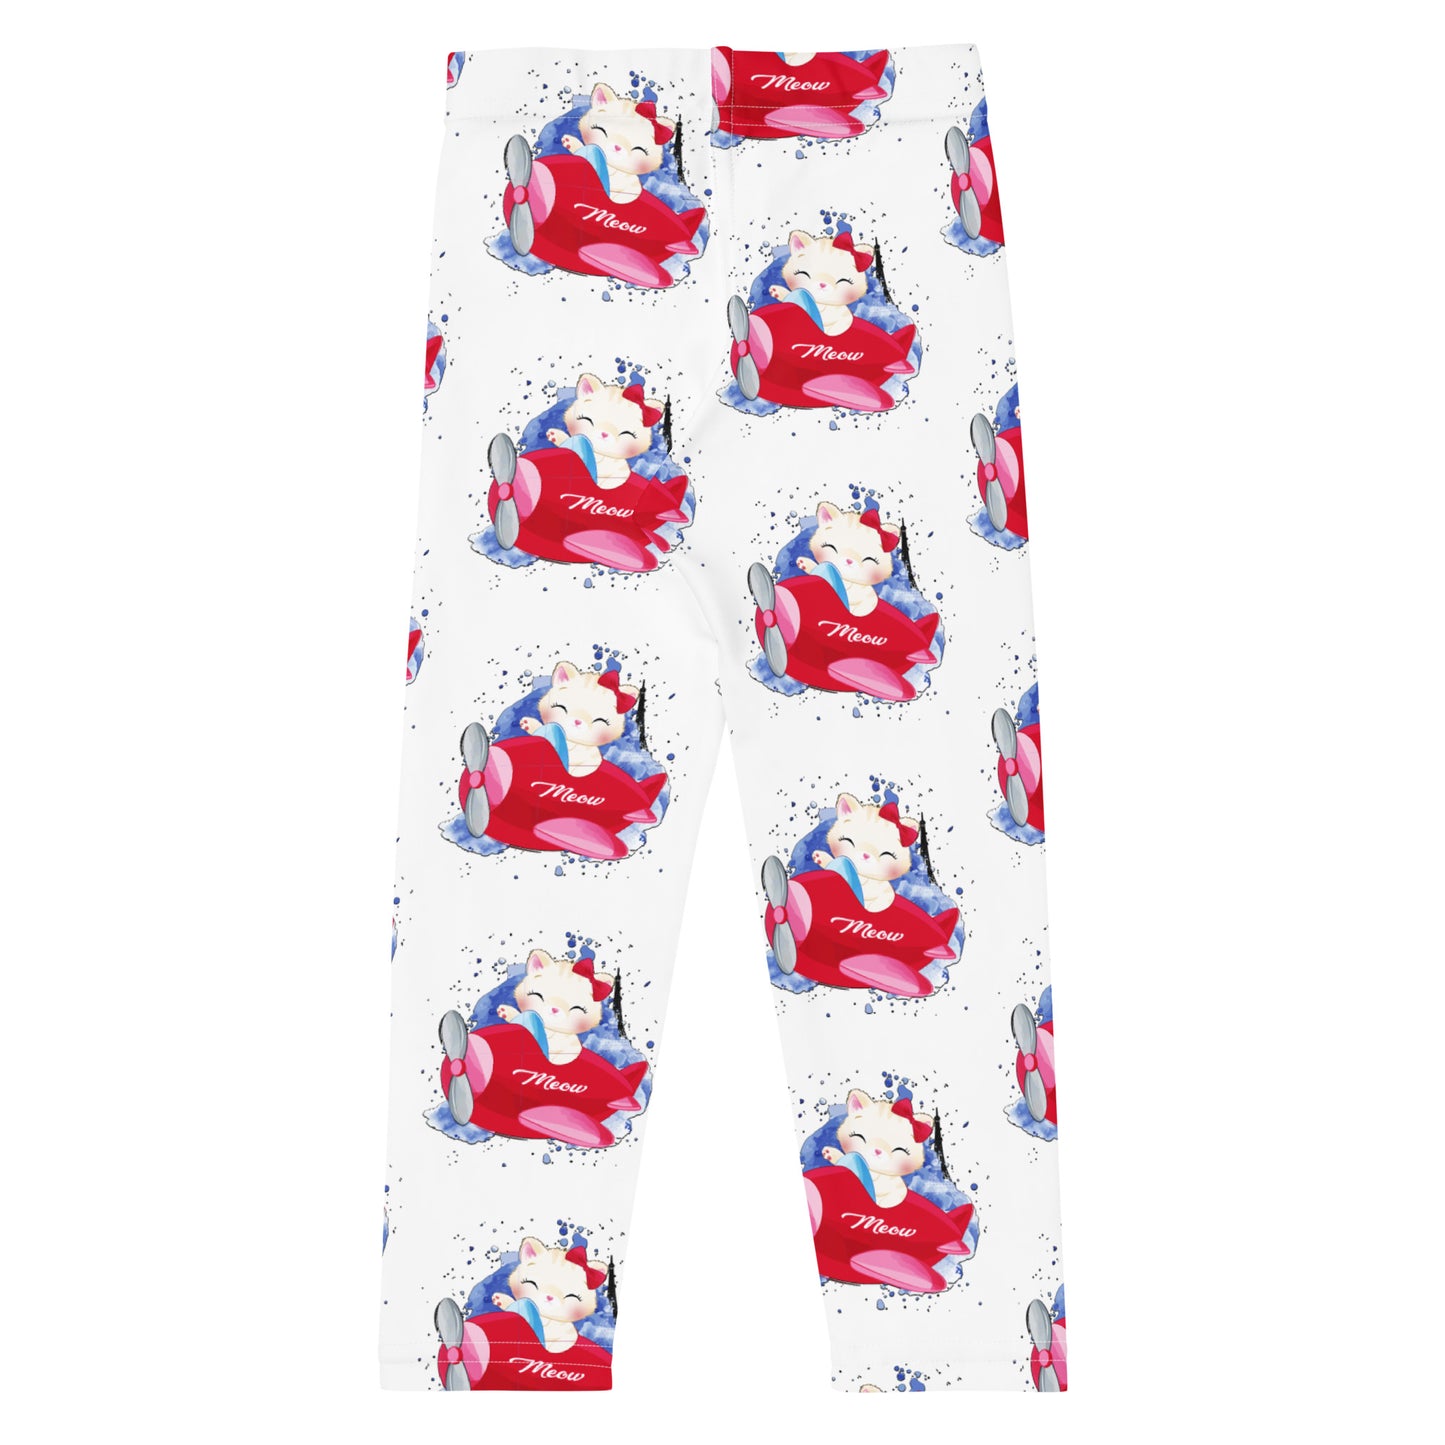 Cute Kitty Cat Flying with Aeroplan Leggings, No. 0311